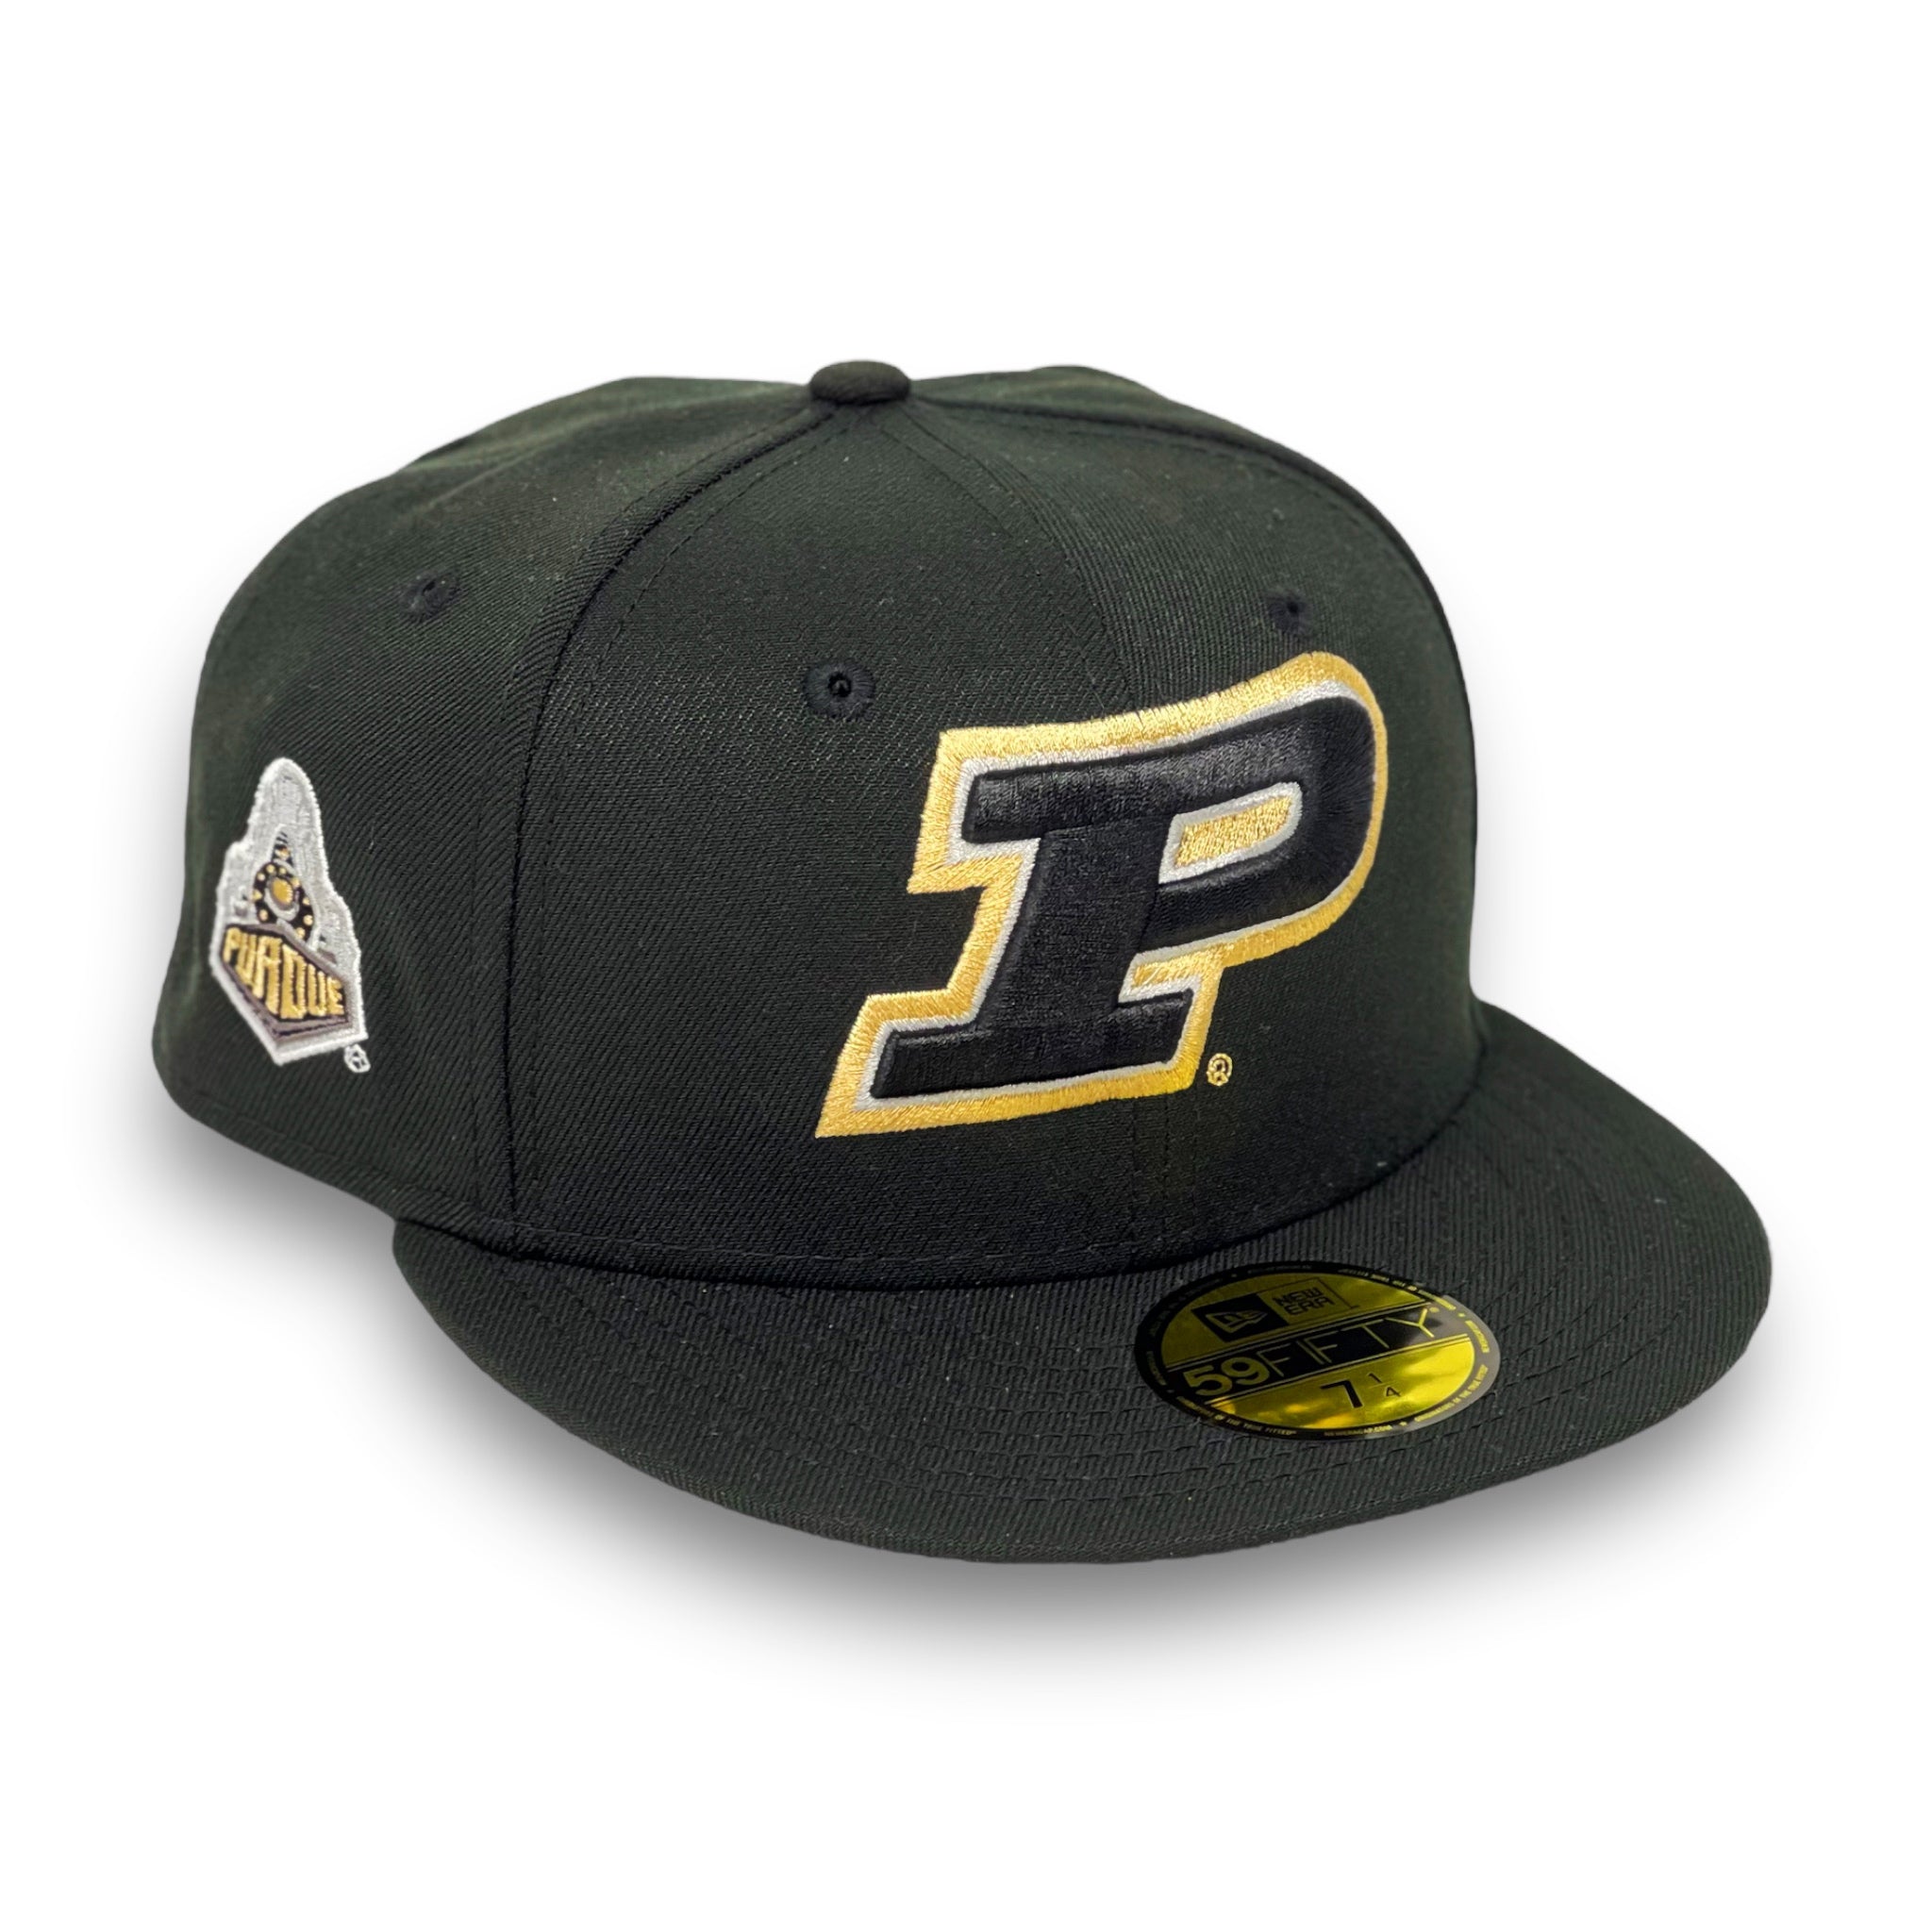 PURDUE BOILERMAKERS NEW ERA 59FIFTY FITTED